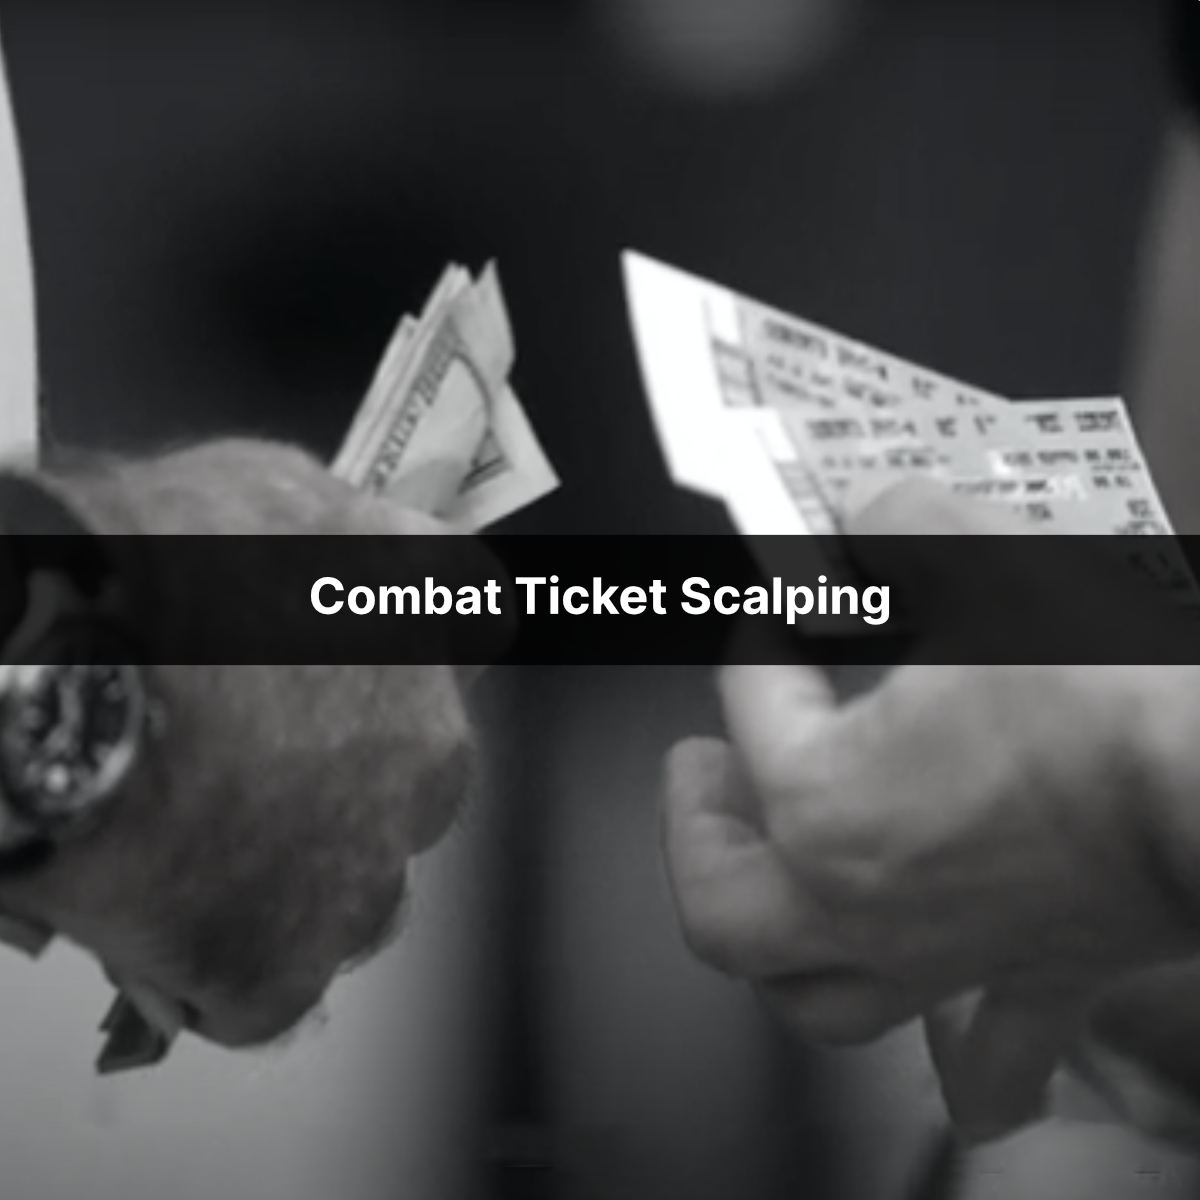 Close-up black and white shot of two hands exchanging tickets for cash. Title on top says combat ticket scalping.